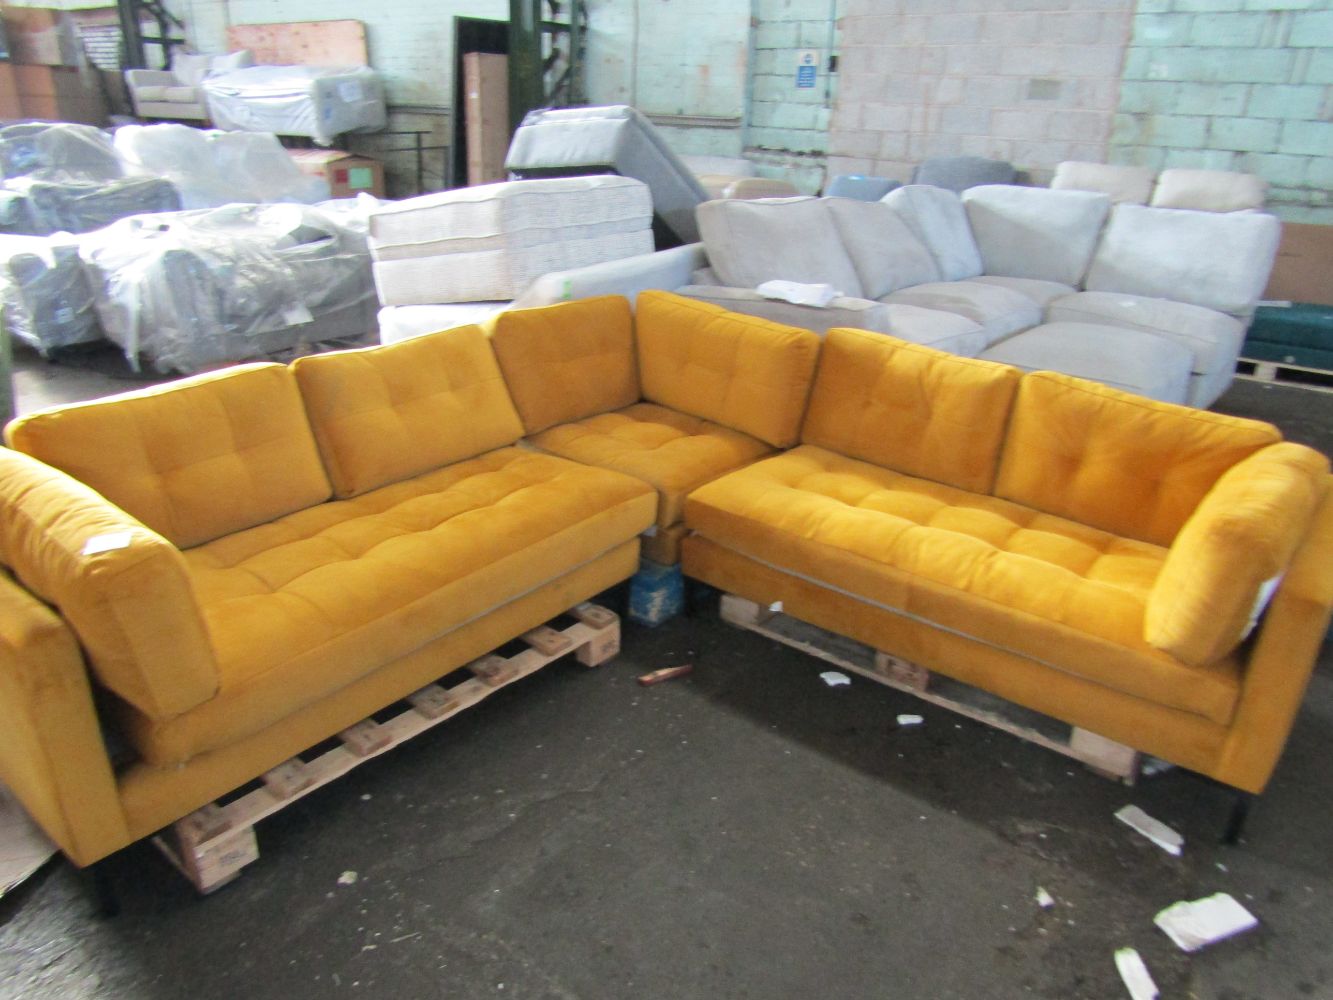 New lots added daily to SCS sofa sale, sofas, armchairs and footstools from one of Britain's leading sofa suppliers